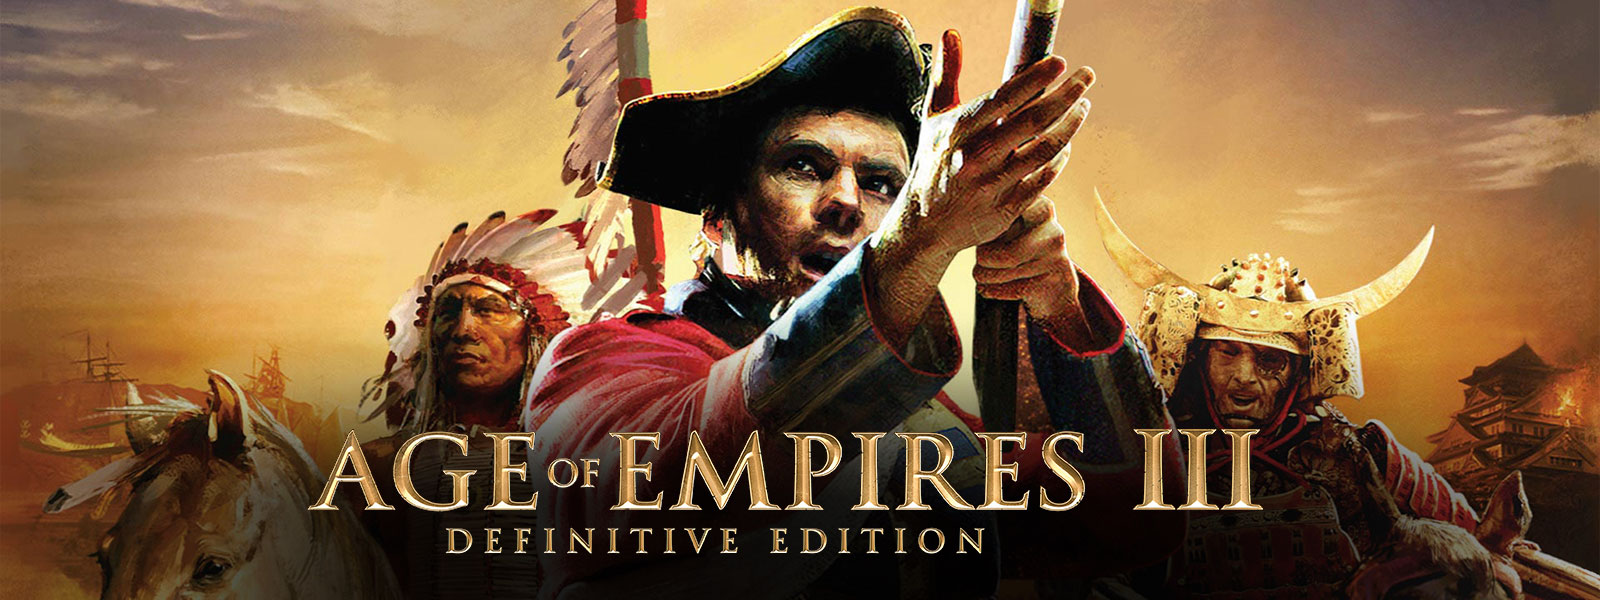 Age of empires 3 definitive edition